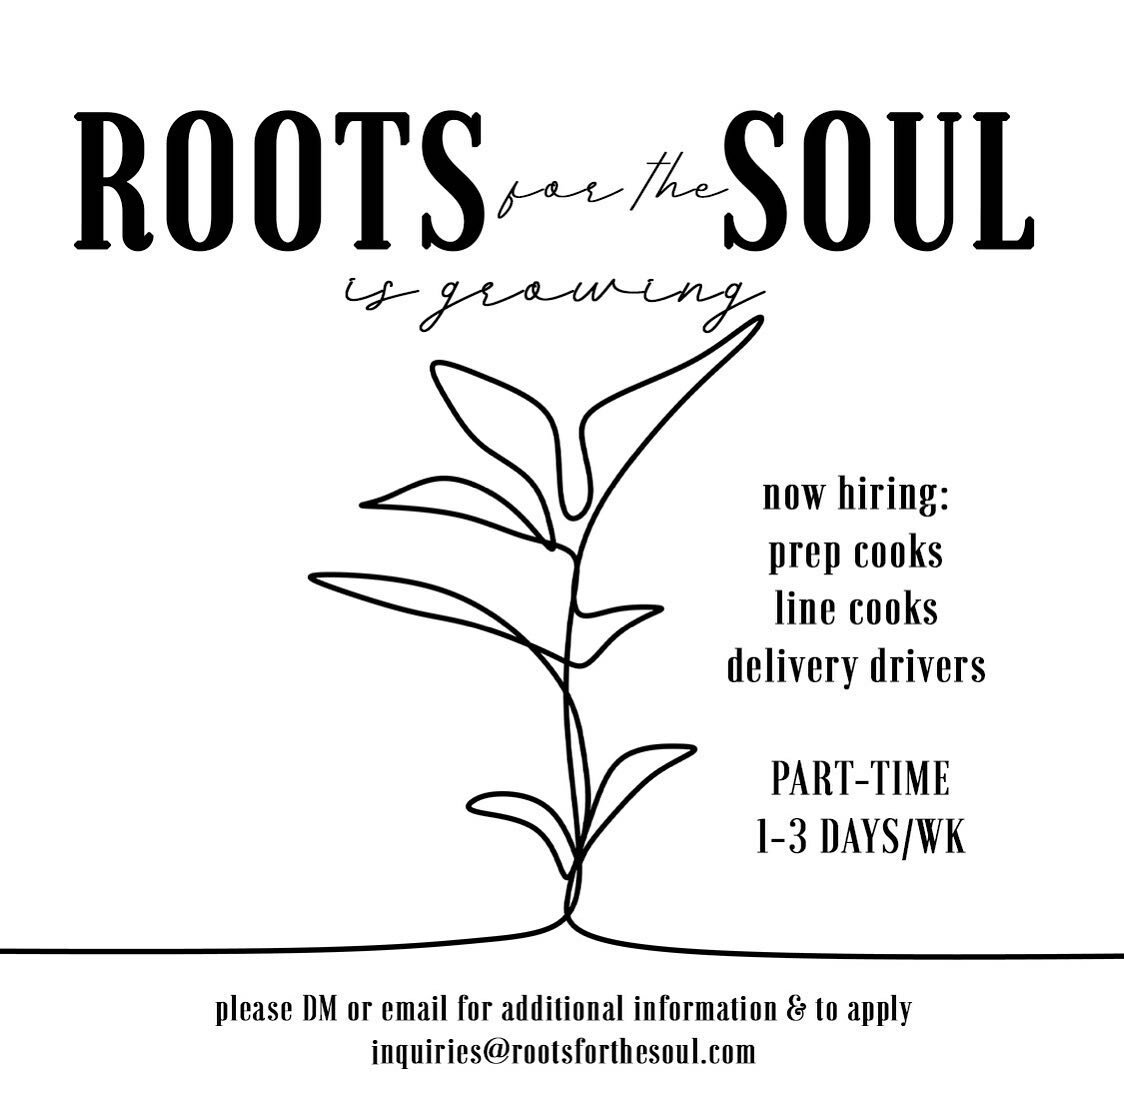 We are growing &amp; would love to add some amazing people to our team. Experience is always preferred, but not required if you&rsquo;ve got the drive! DM or email us to inquire. Exciting things are ahead! Please share with your network!! 

#rootsfor